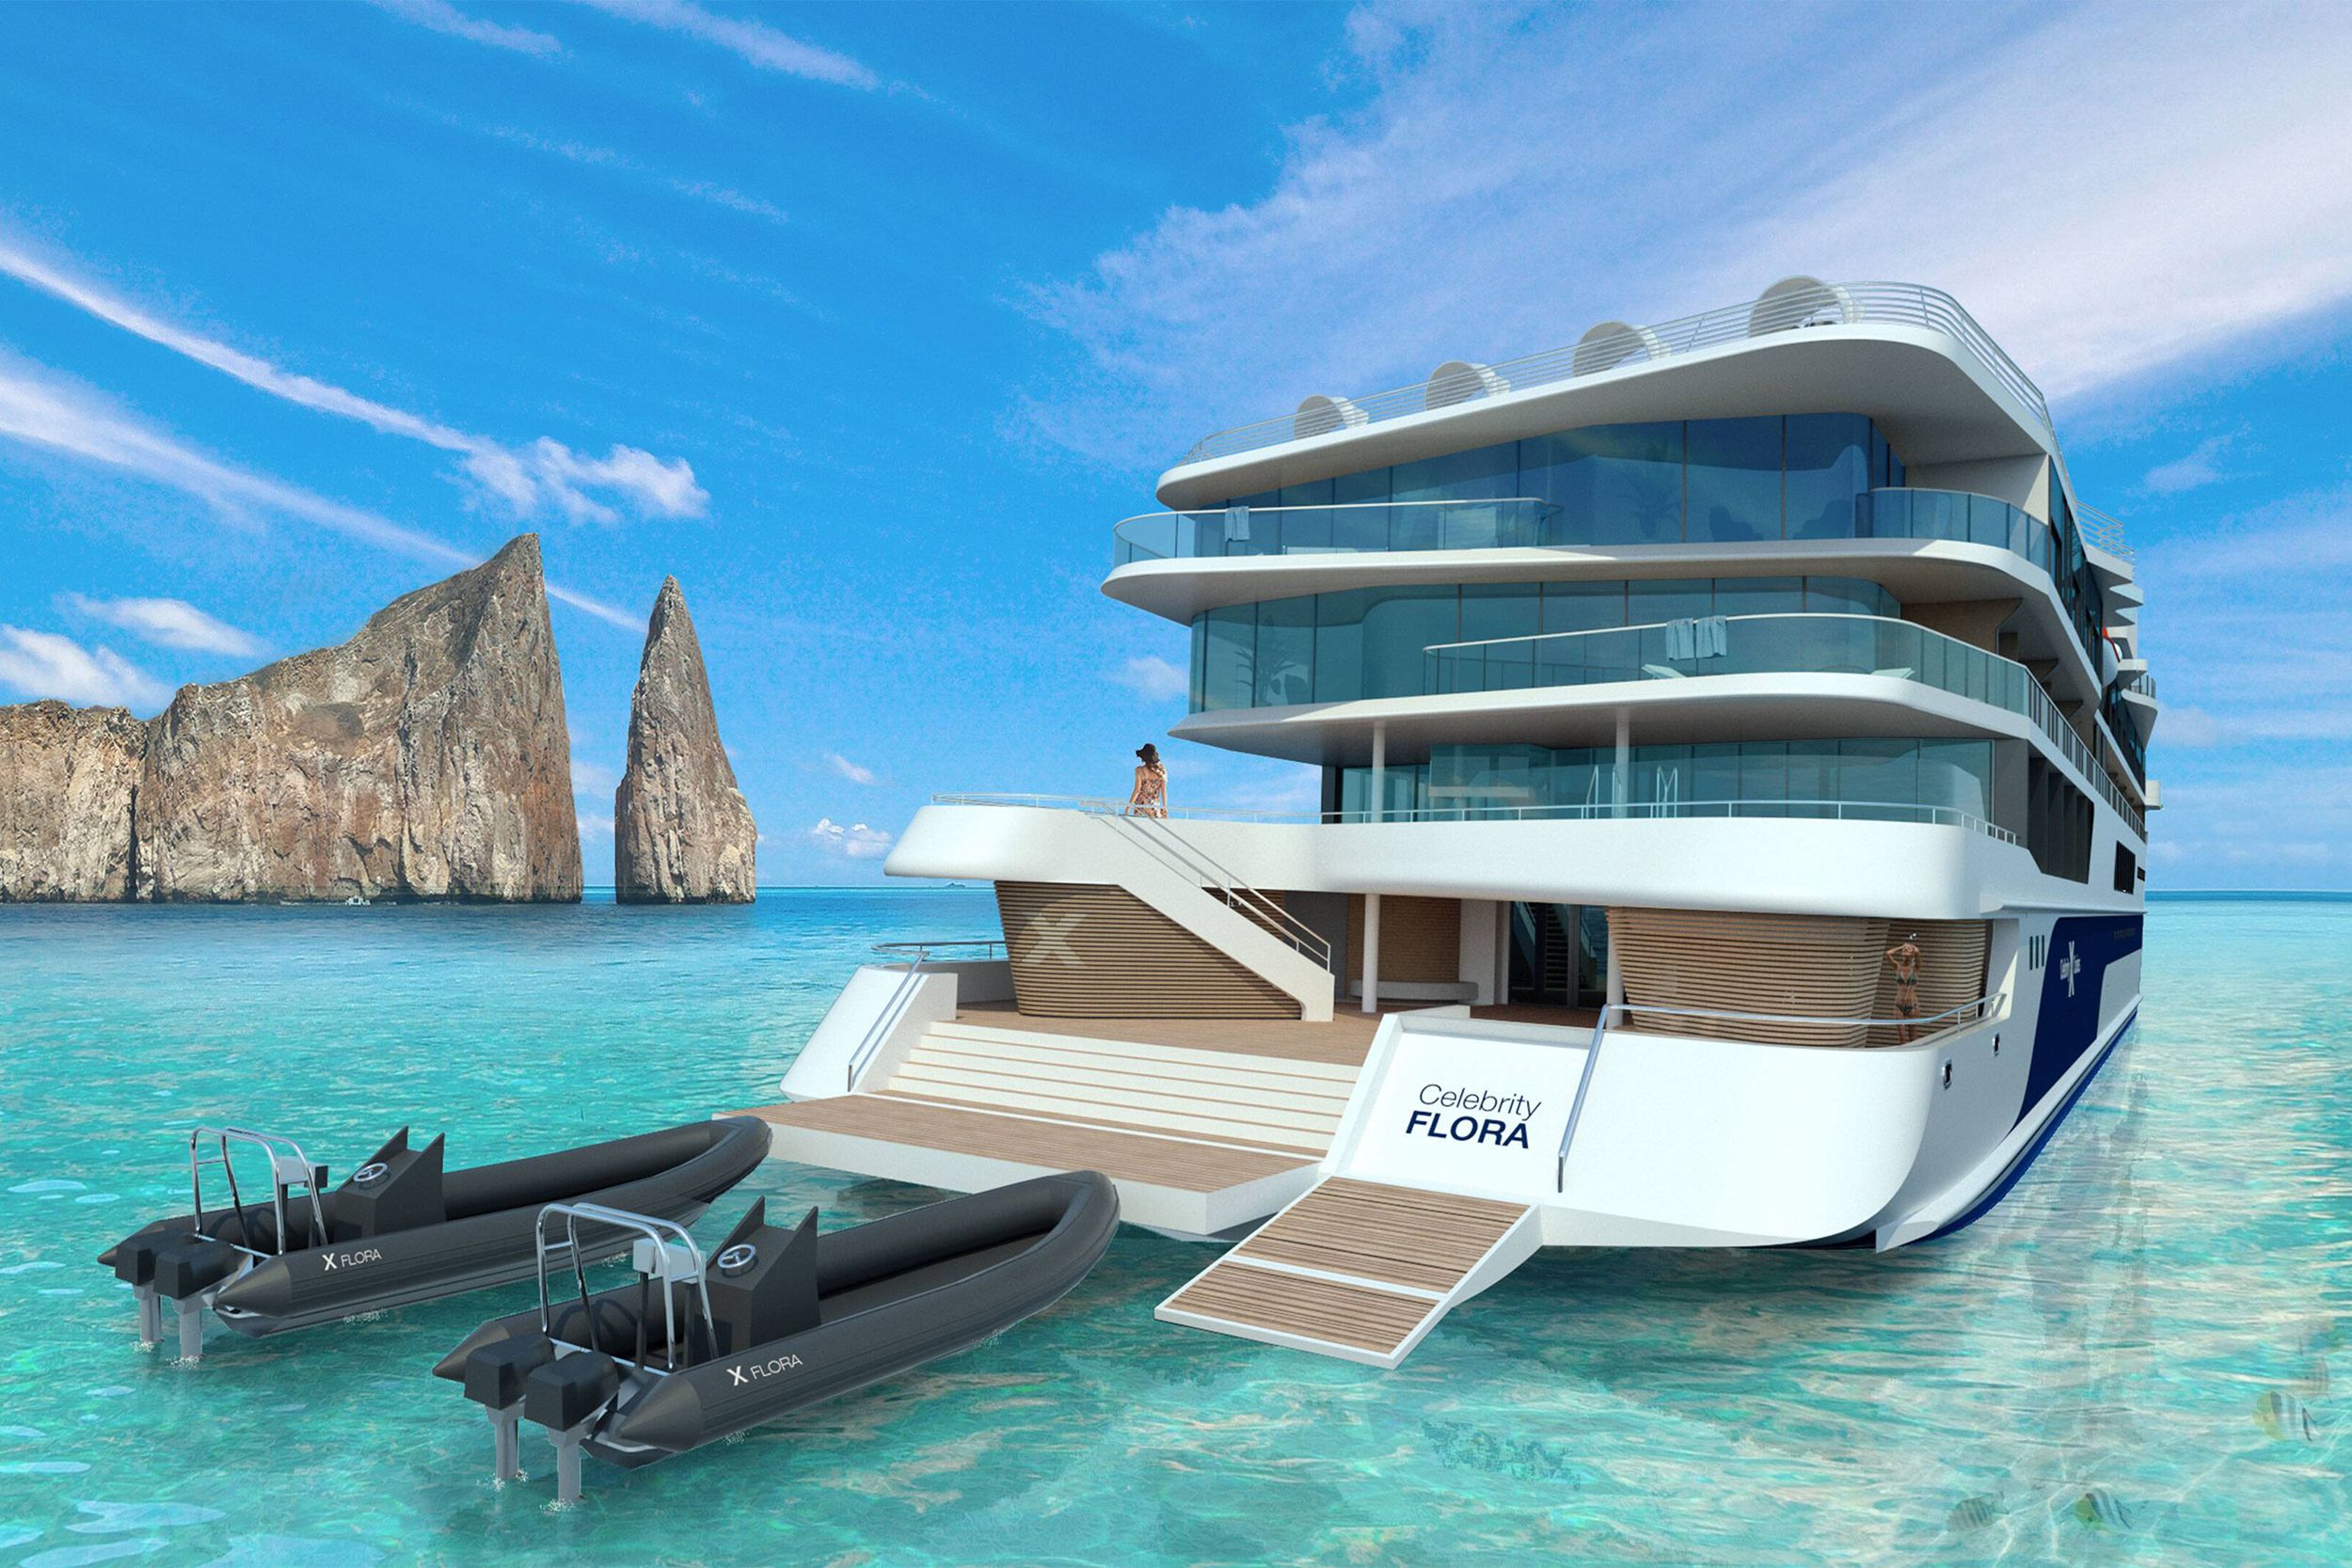 <p>This all-suite so-called "luxury mega yacht" launched sails the Galapagos, which means it's allowed an occupancy of only 100 — each of whom will arrive at their <a href="https://www.celebritycruises.com/cruise-ships/celebrity-flora">Celebrity Flora</a> stateroom with a personal suite attendant to help them unpack. Cabanas transform into double beds for sleeping under the stars (it's called "glamping,") and there's a custom stargazing lesson from one of the onboard naturalists. But there's also an observatory, library, and eco-conscious technology to keep travelers focused on the science. </p><p><b>Related:</b> <a href="https://blog.cheapism.com/people-should-not-go-on-a-cruise/">15 Types of People Who Shouldn't Take a Cruise</a></p><div class="rich-text"><p>This article was originally published on <a href="https://blog.cheapism.com/most-expensive-cruise-ship/">Cheapism</a></p></div>